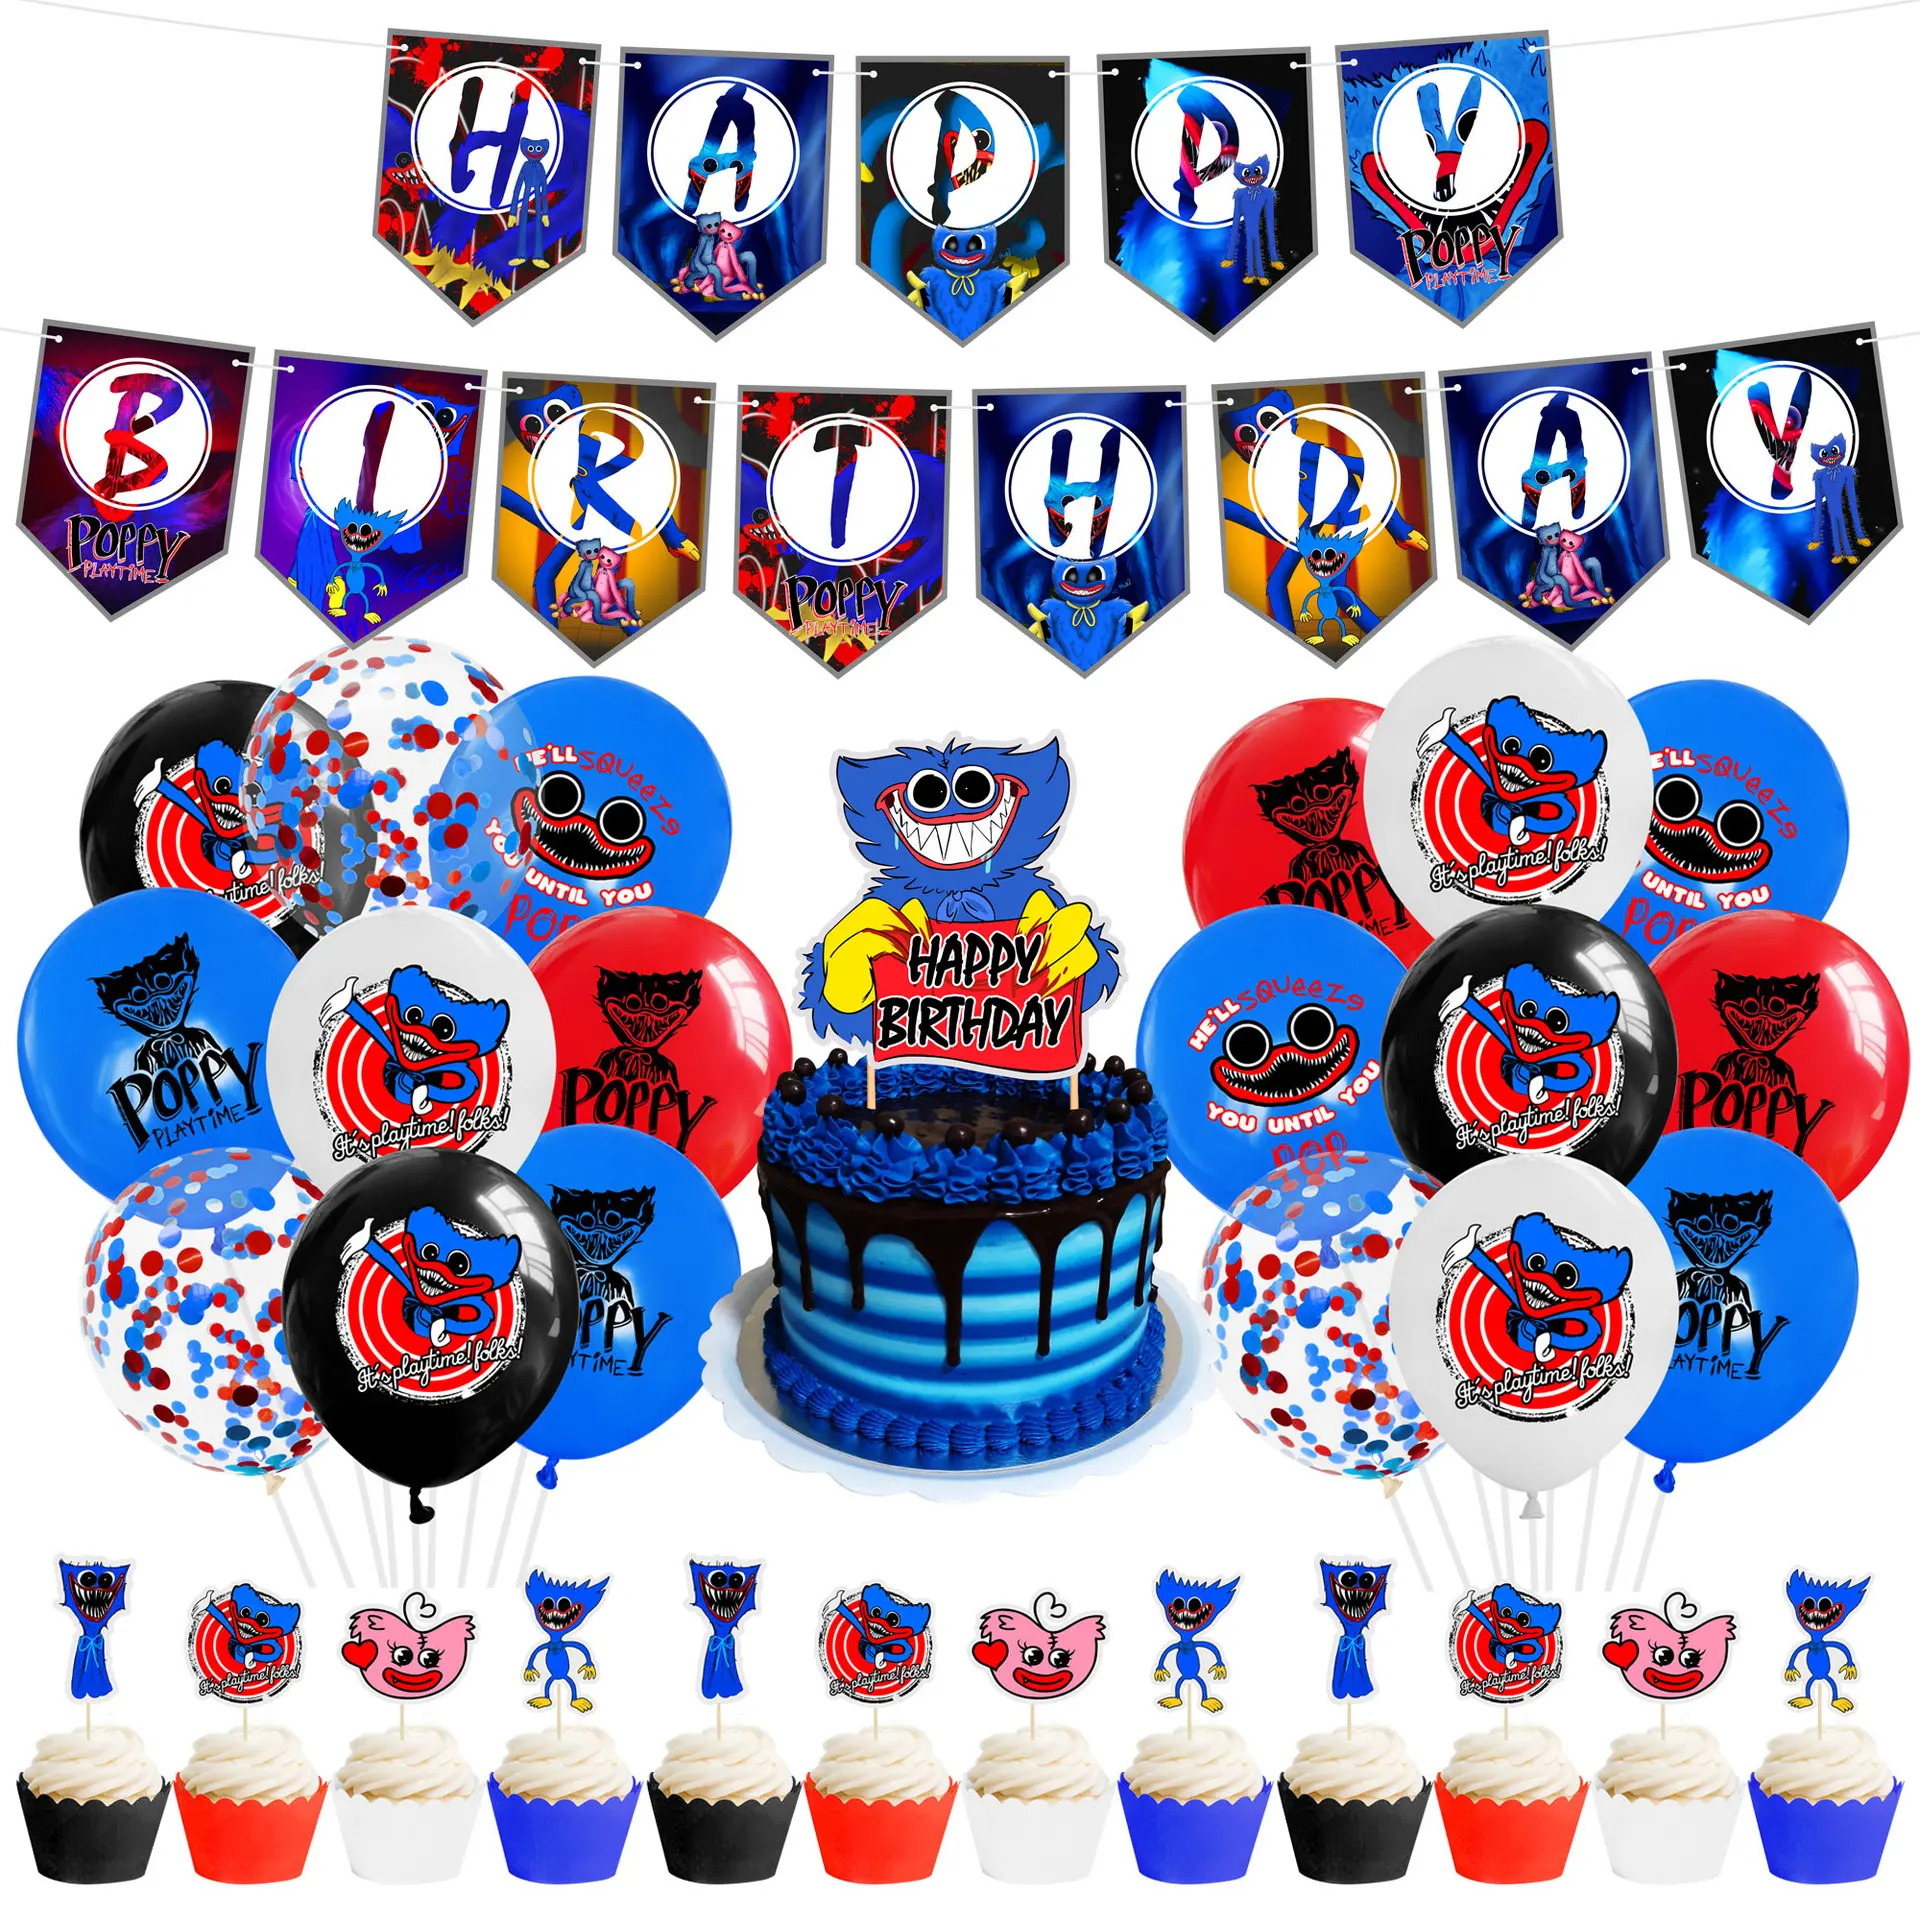 Huggy Wuggy Décoration Ballons, 10 pièces Poppy Playtime Fêtes Décorations,  Huggy Wuggy Anniversaire Ballons, Ballons Bannière Décorations